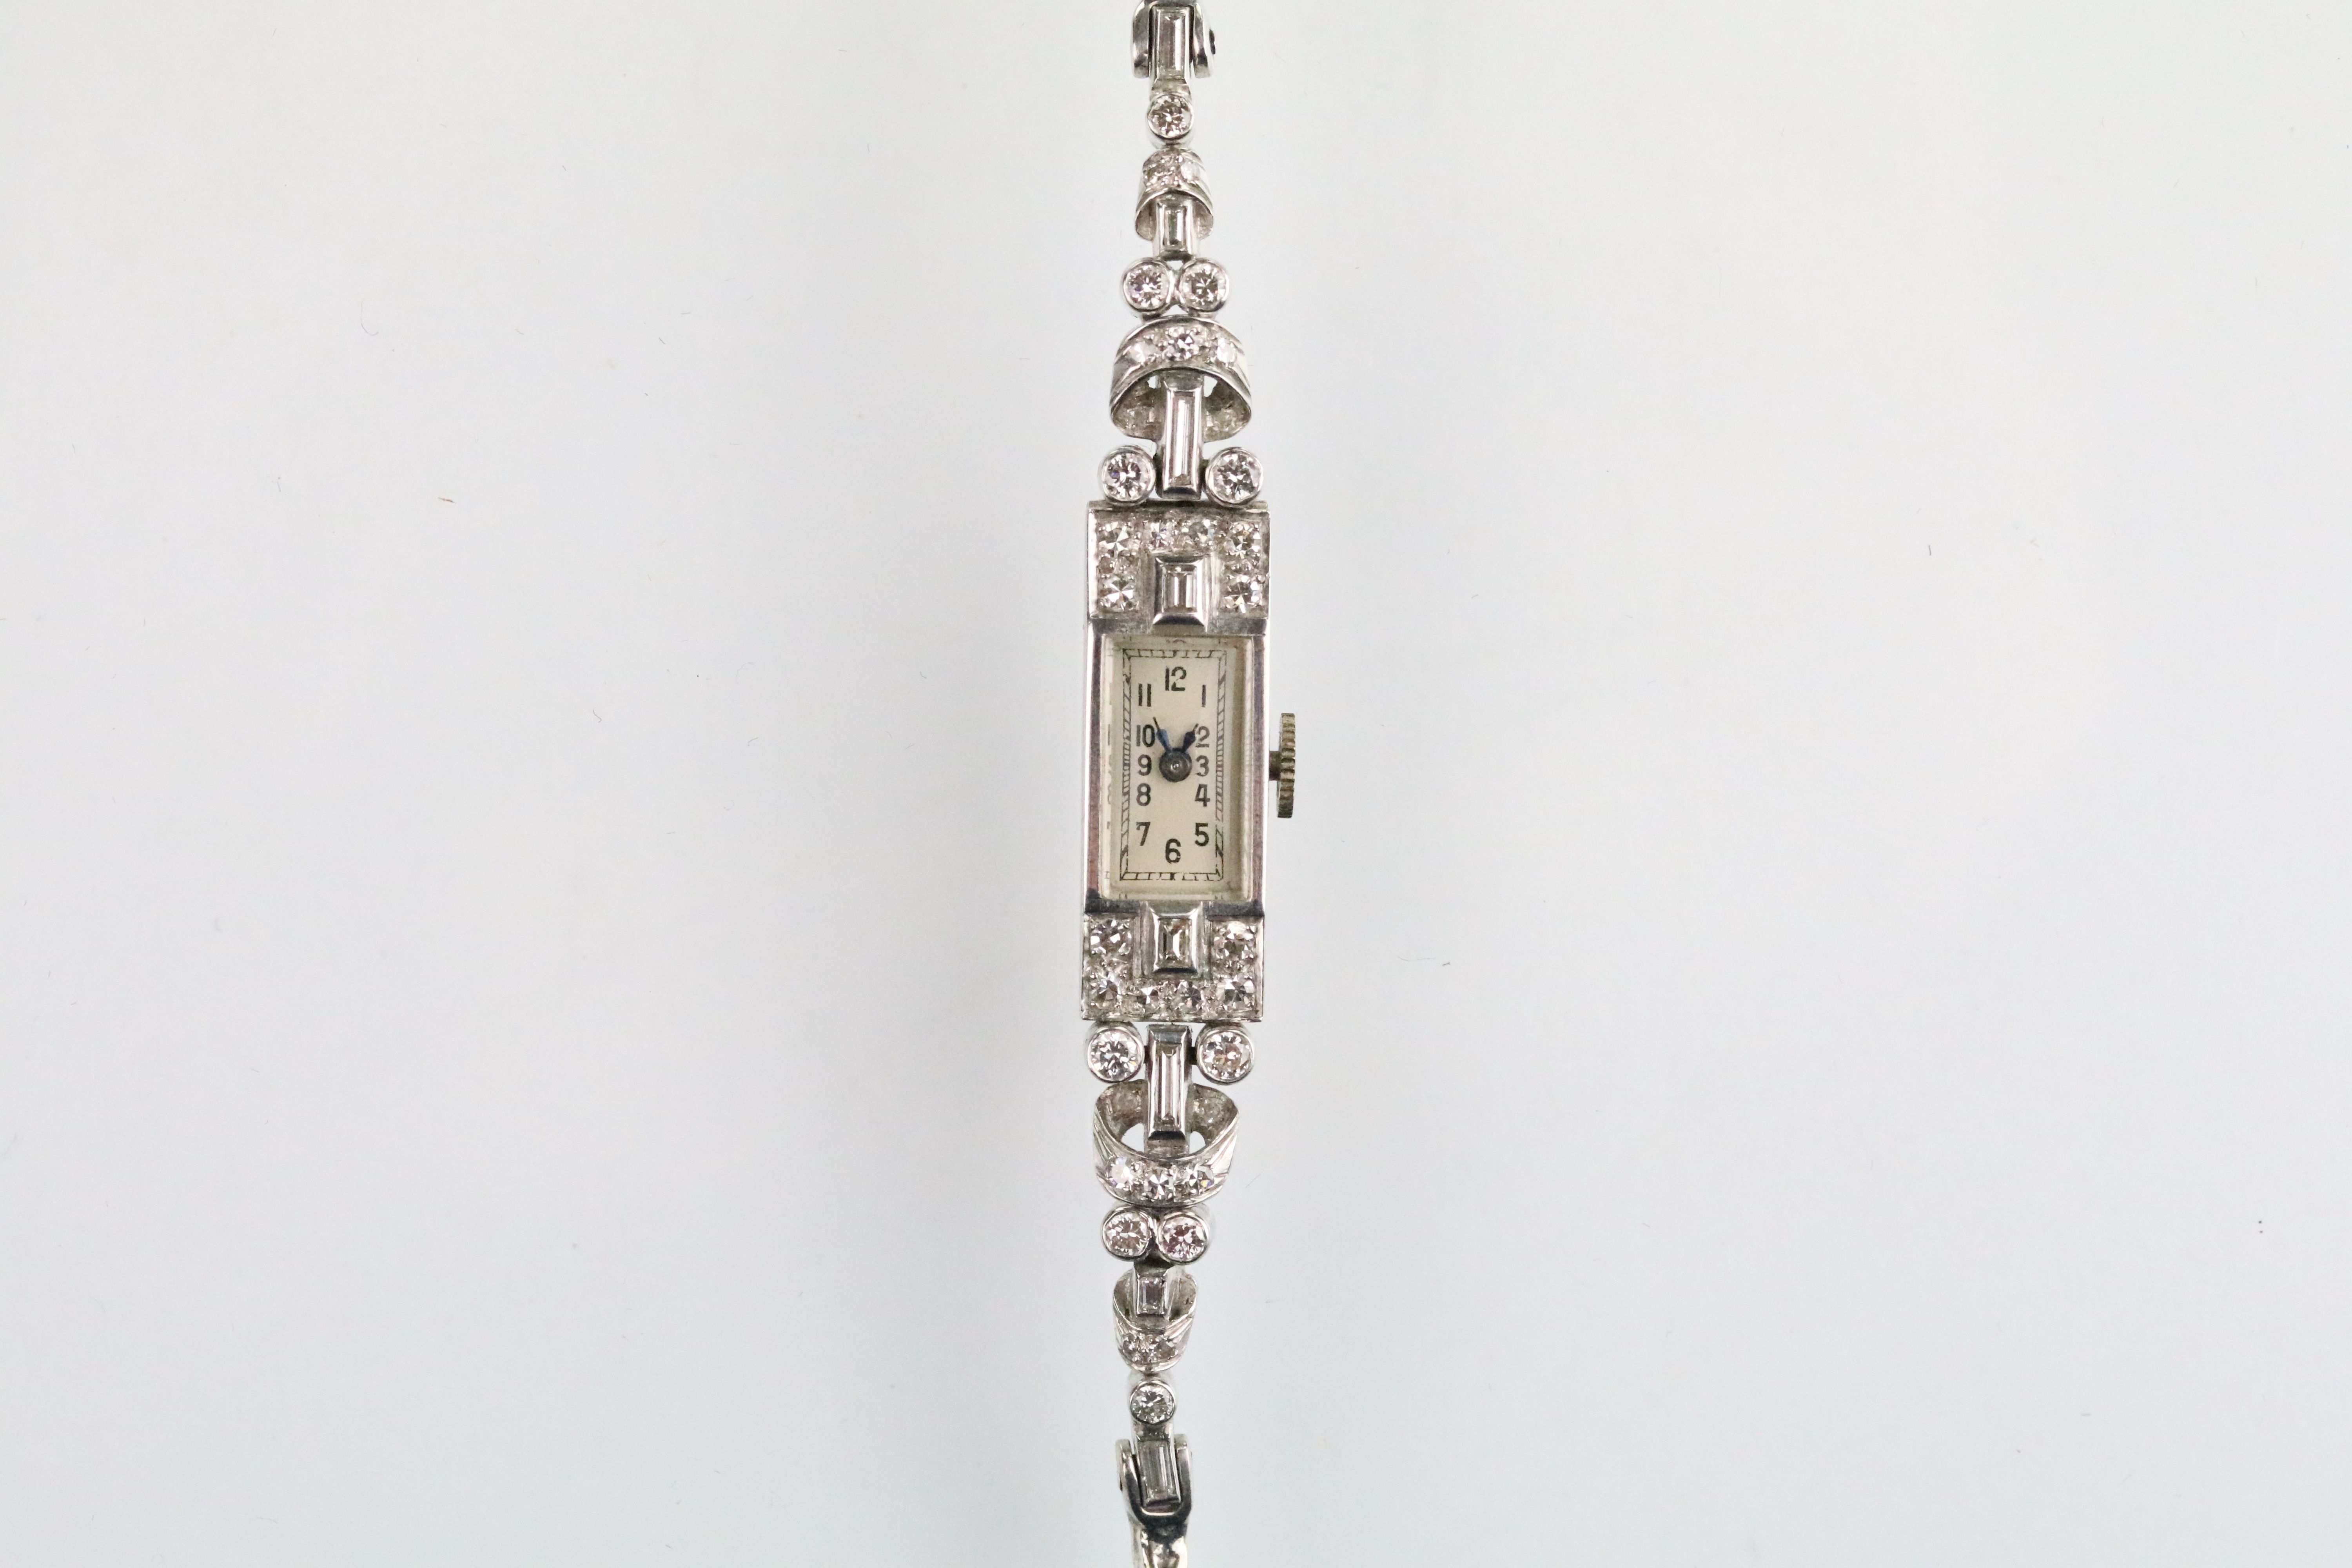 Mid 20th Century platinum, white gold and diamond dress watch. The watch having a rectangular face